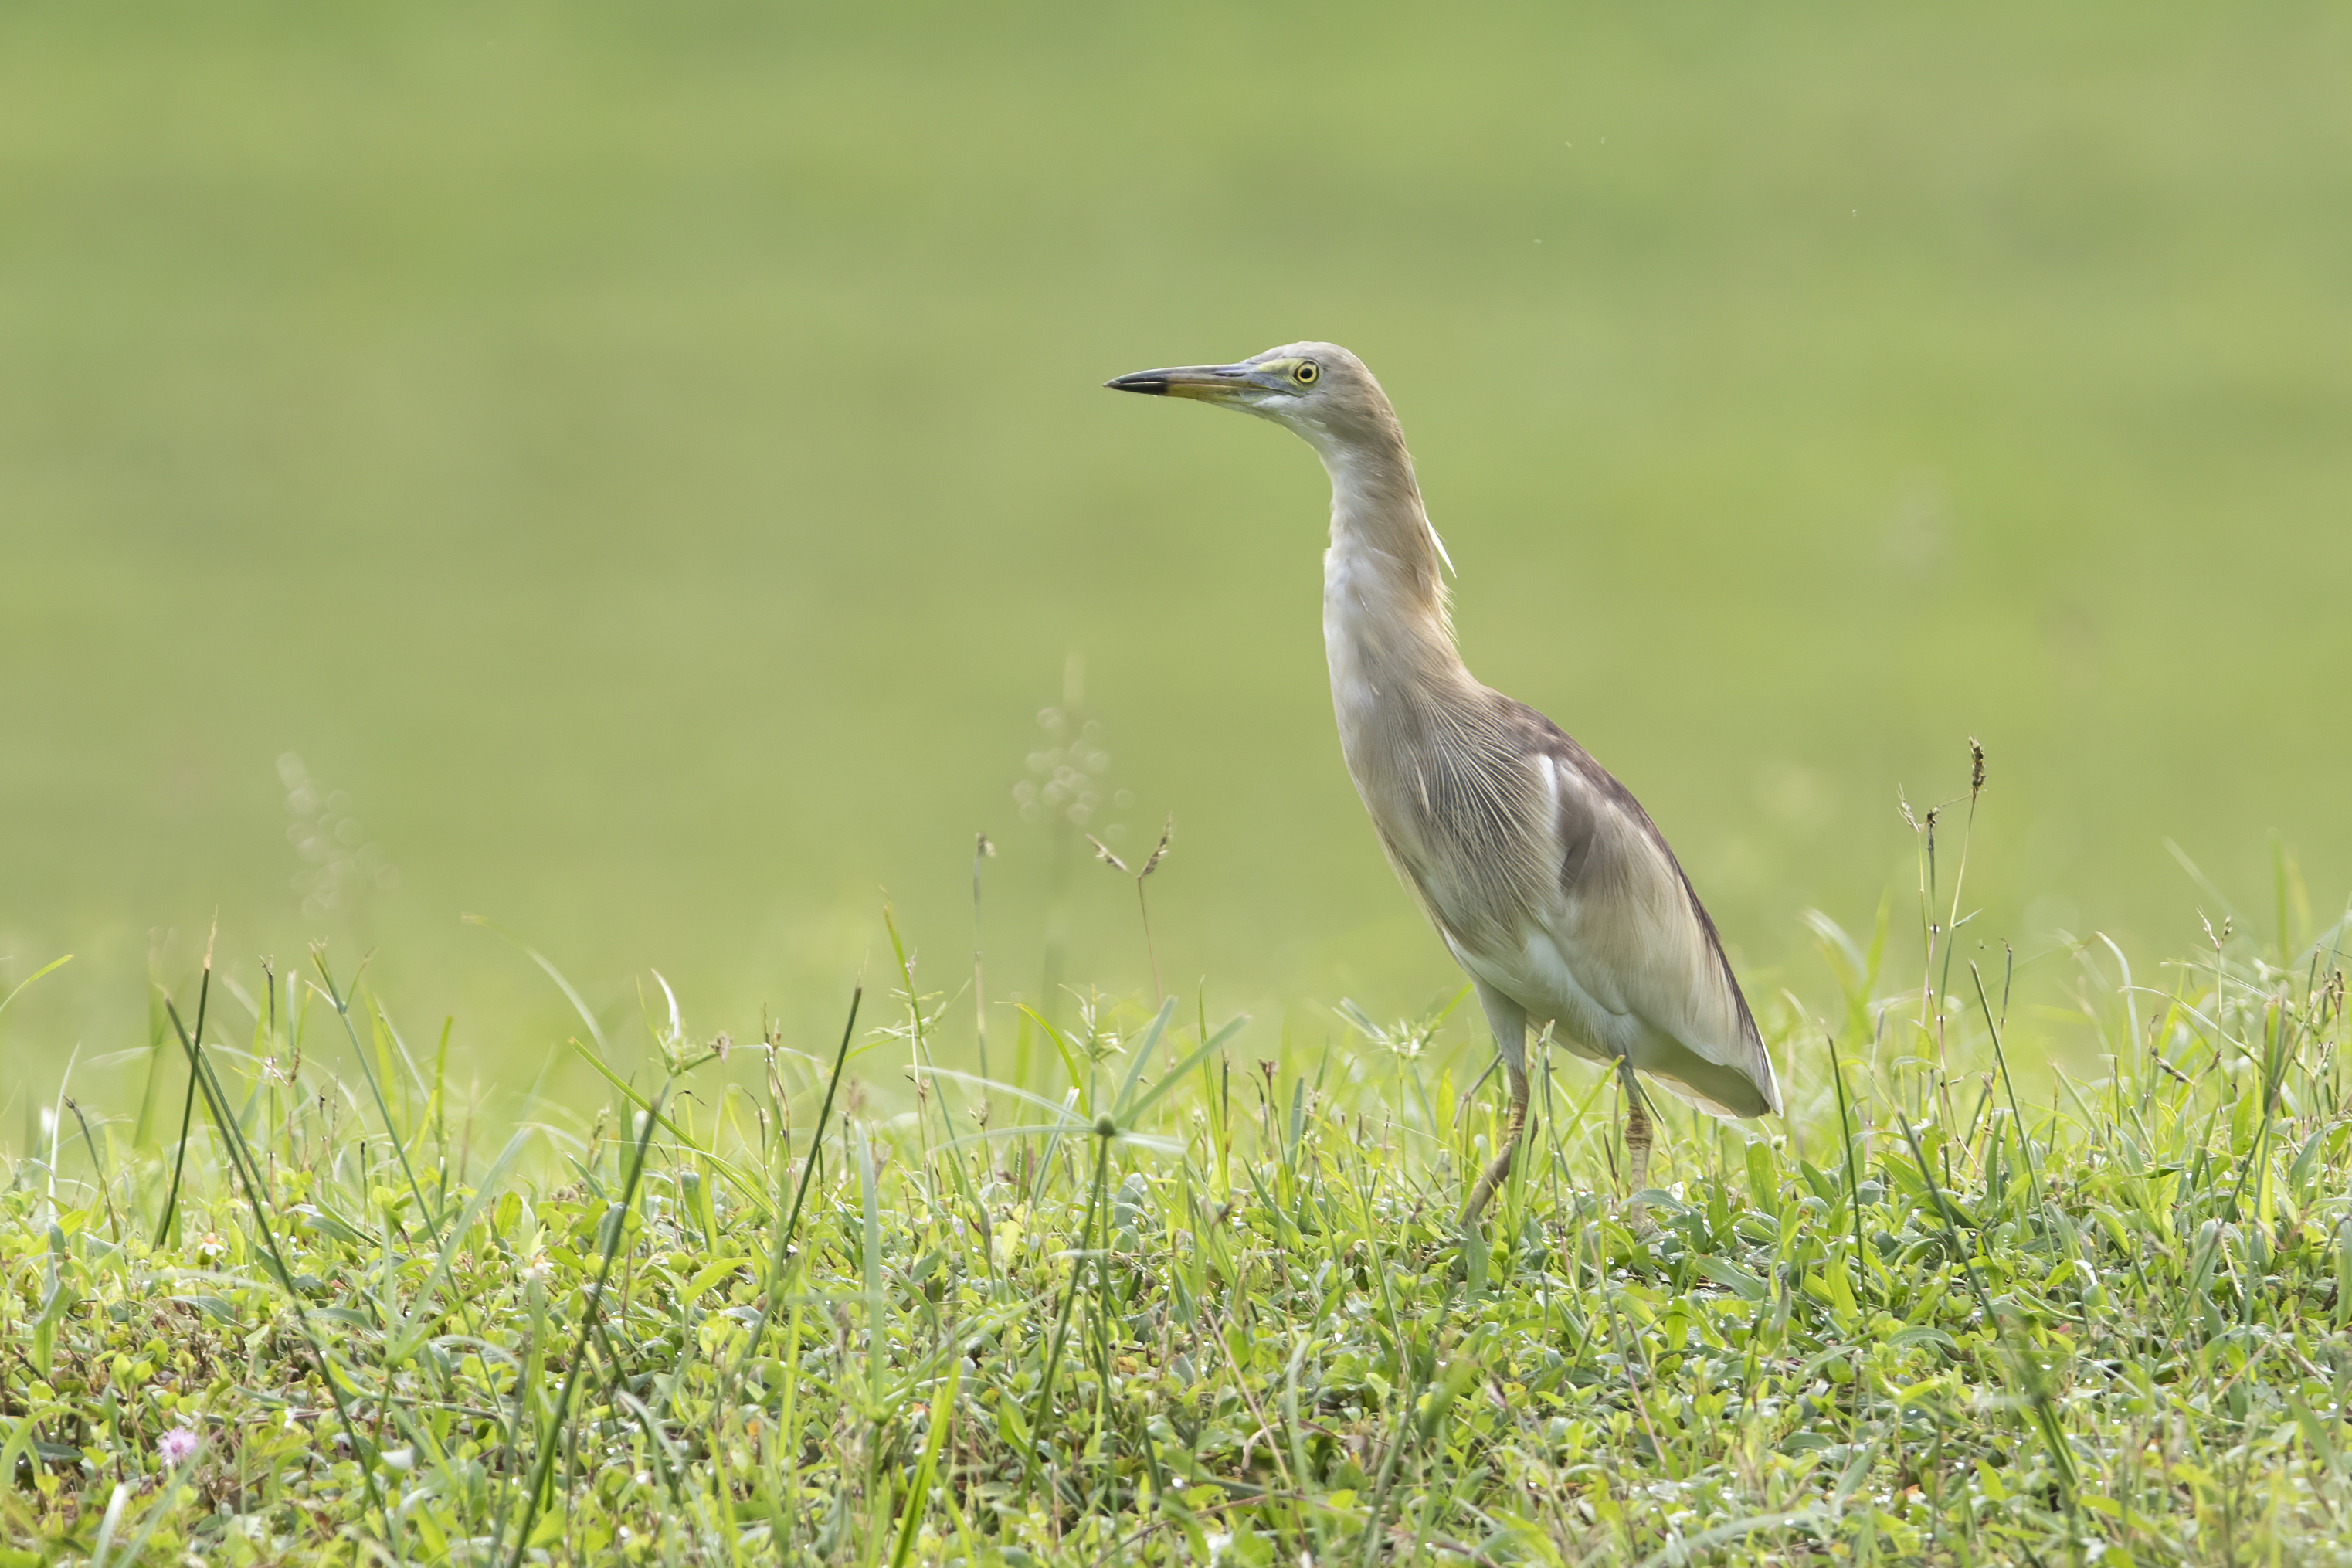 Indian Pond Heron at Dover Road on 12 Apr 2022. Photo credit: Sin Yong Chee Keita